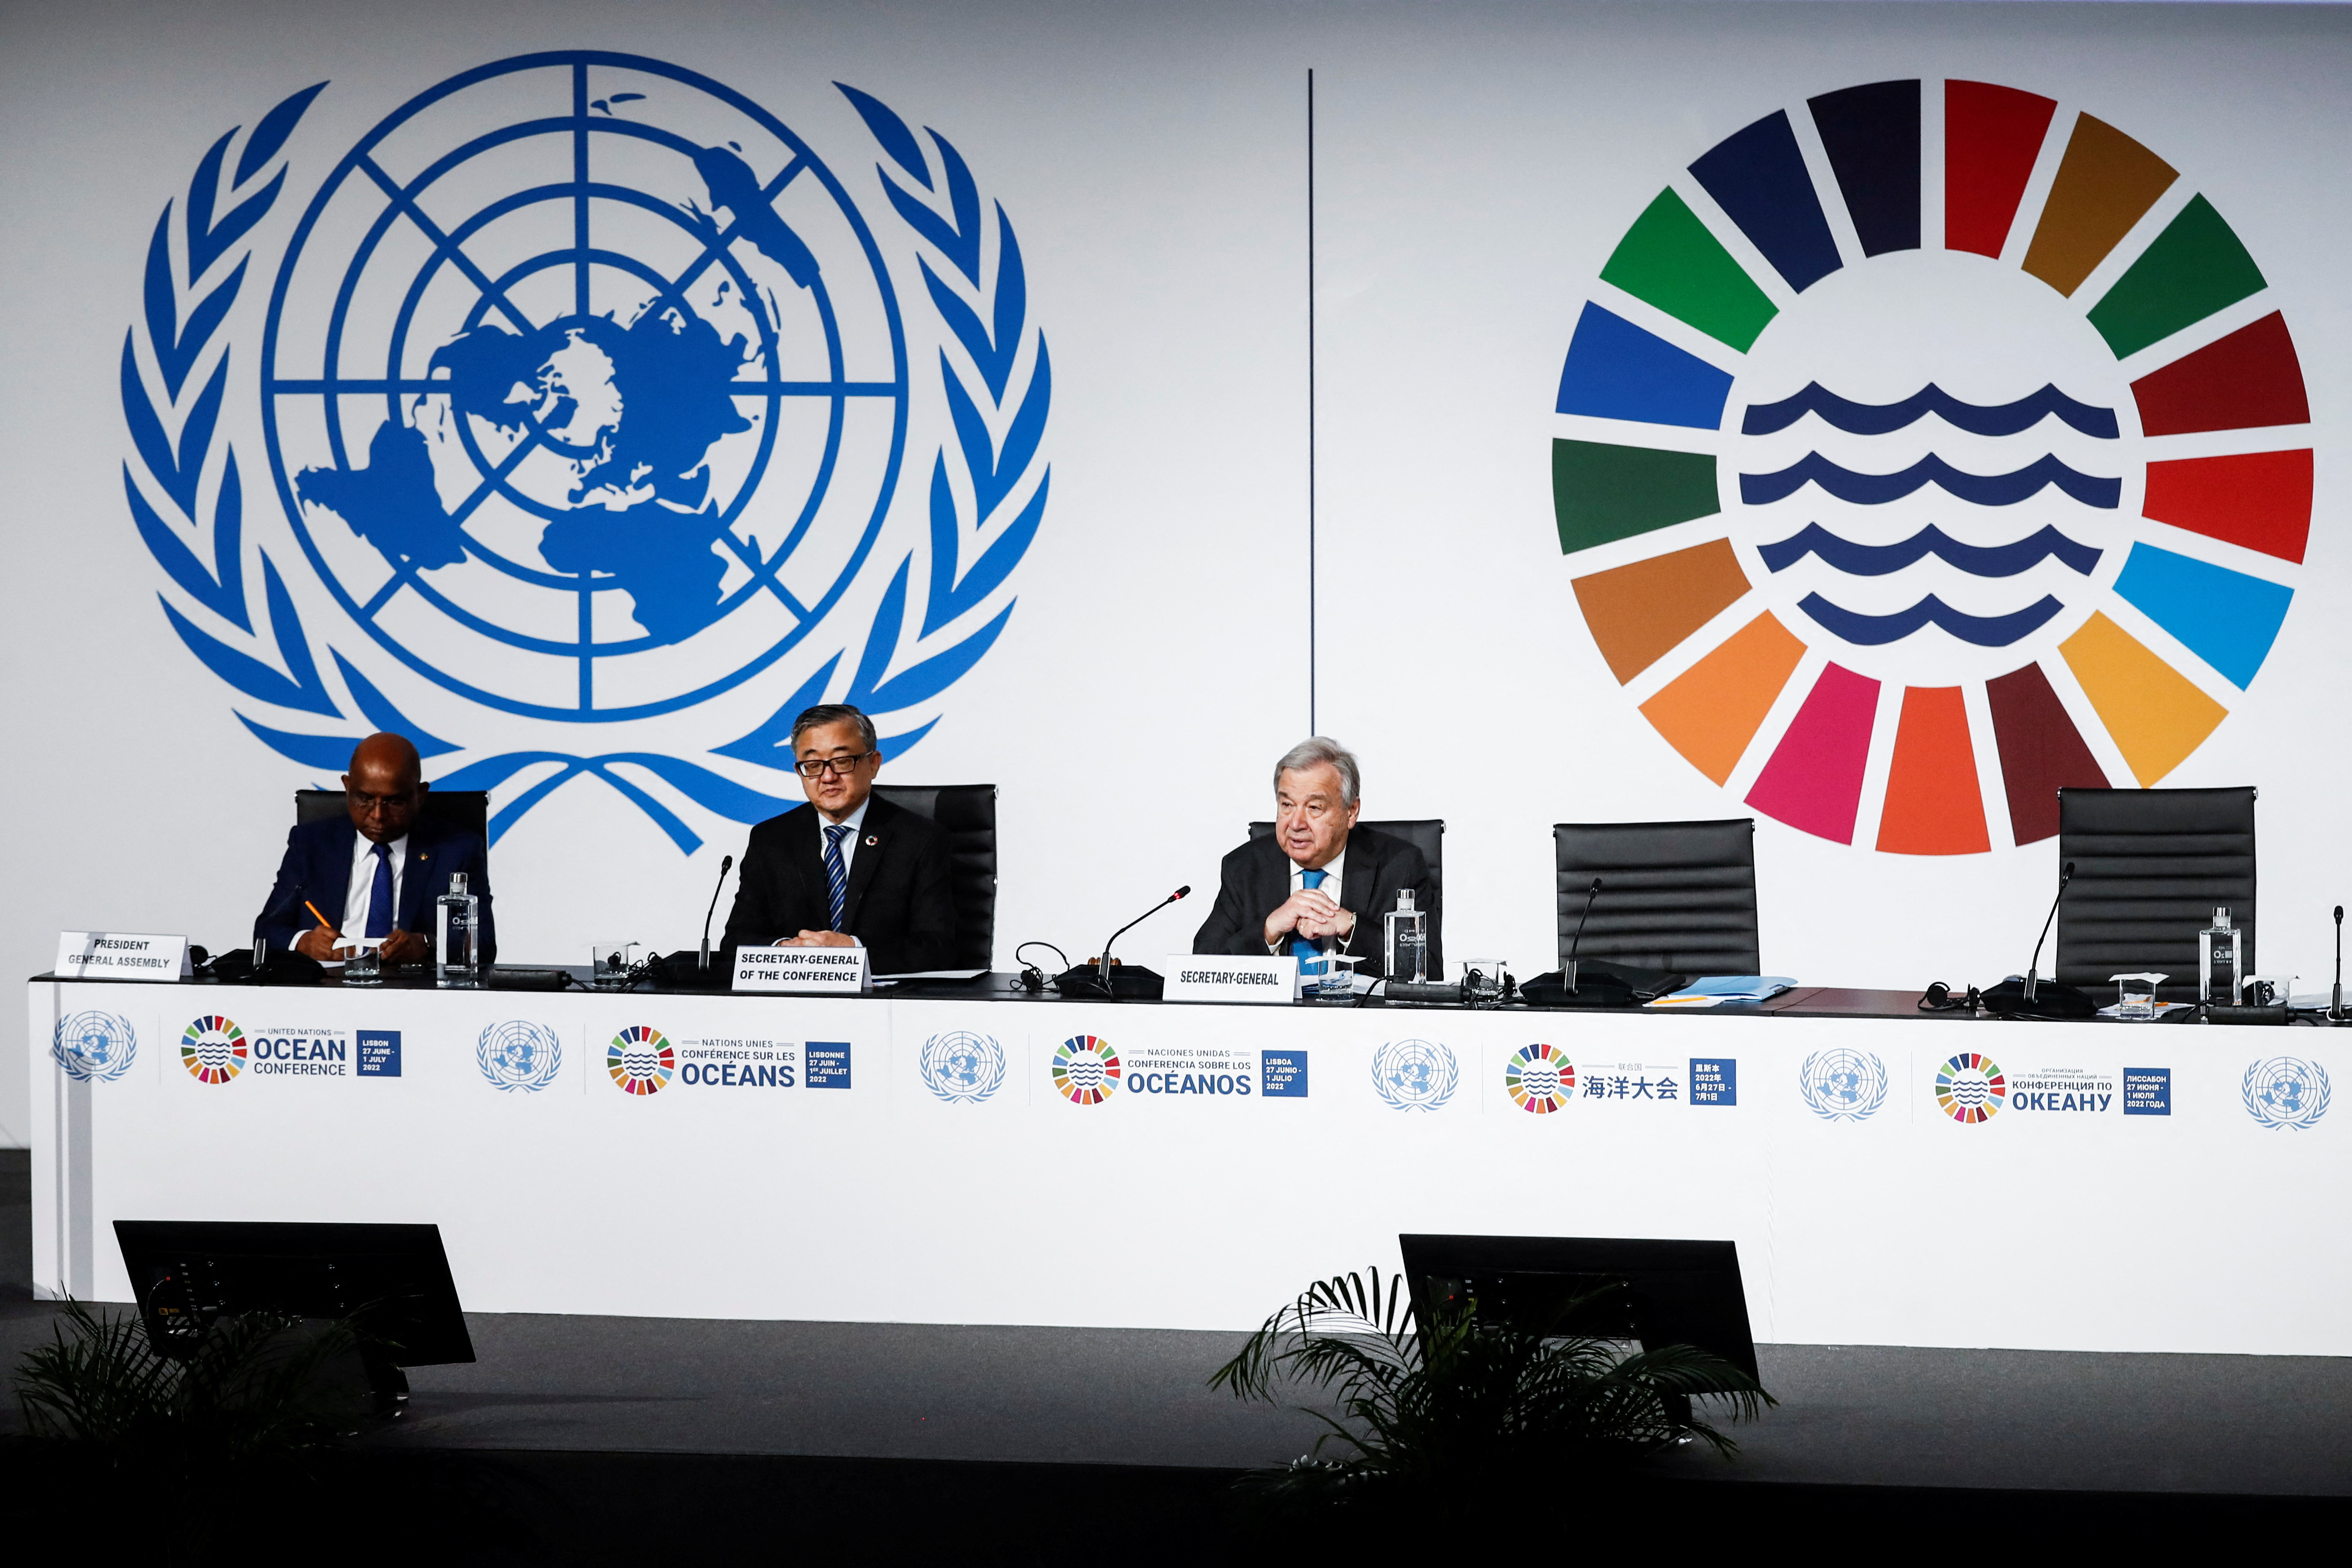 More funds, care needed to save world’s oceans, says UN chief